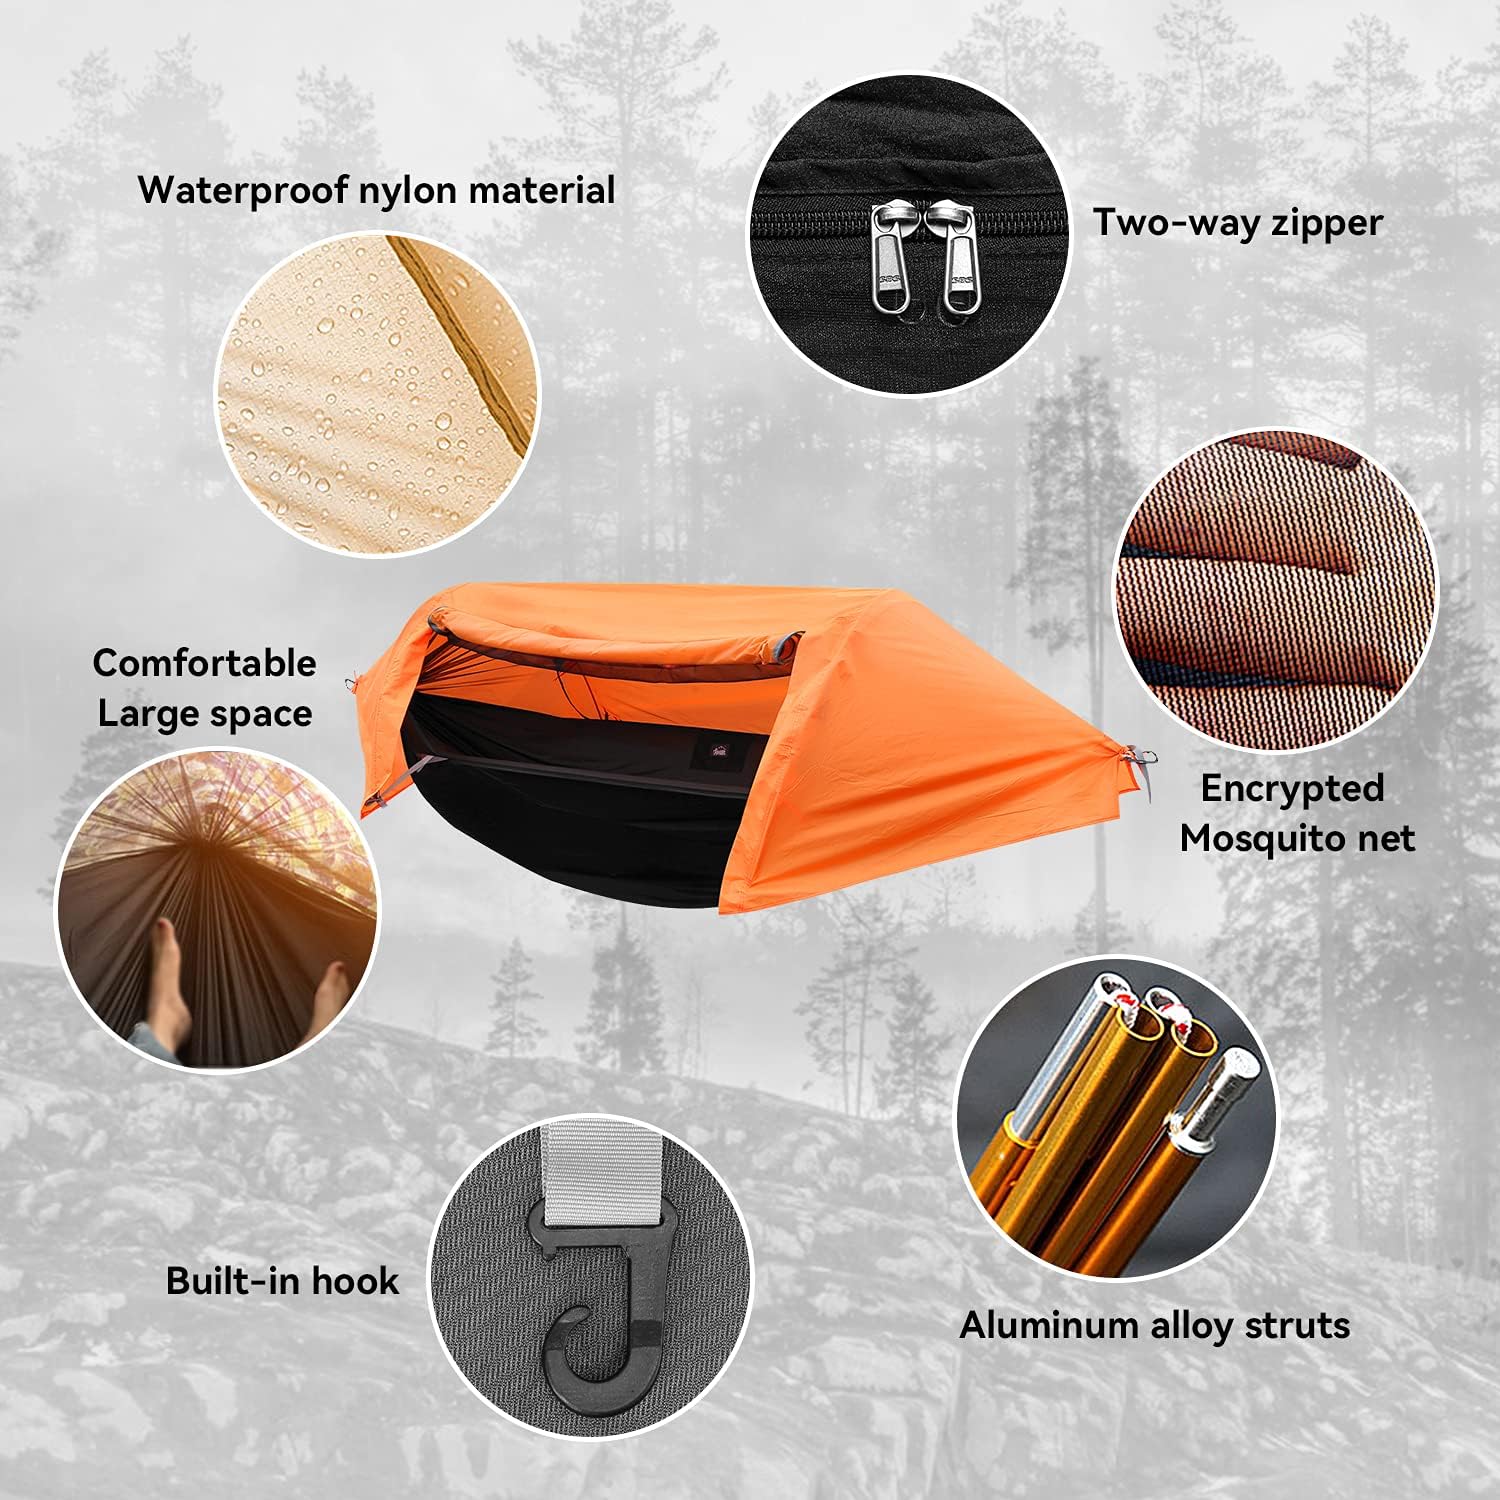 Camping Hammock with Mosquito Net and Rainfly Cover, Camping Hammock, Lightweight Portable Hammock,Waterproof Camping Hammock for Outdoor Backpacking Hiking Travel